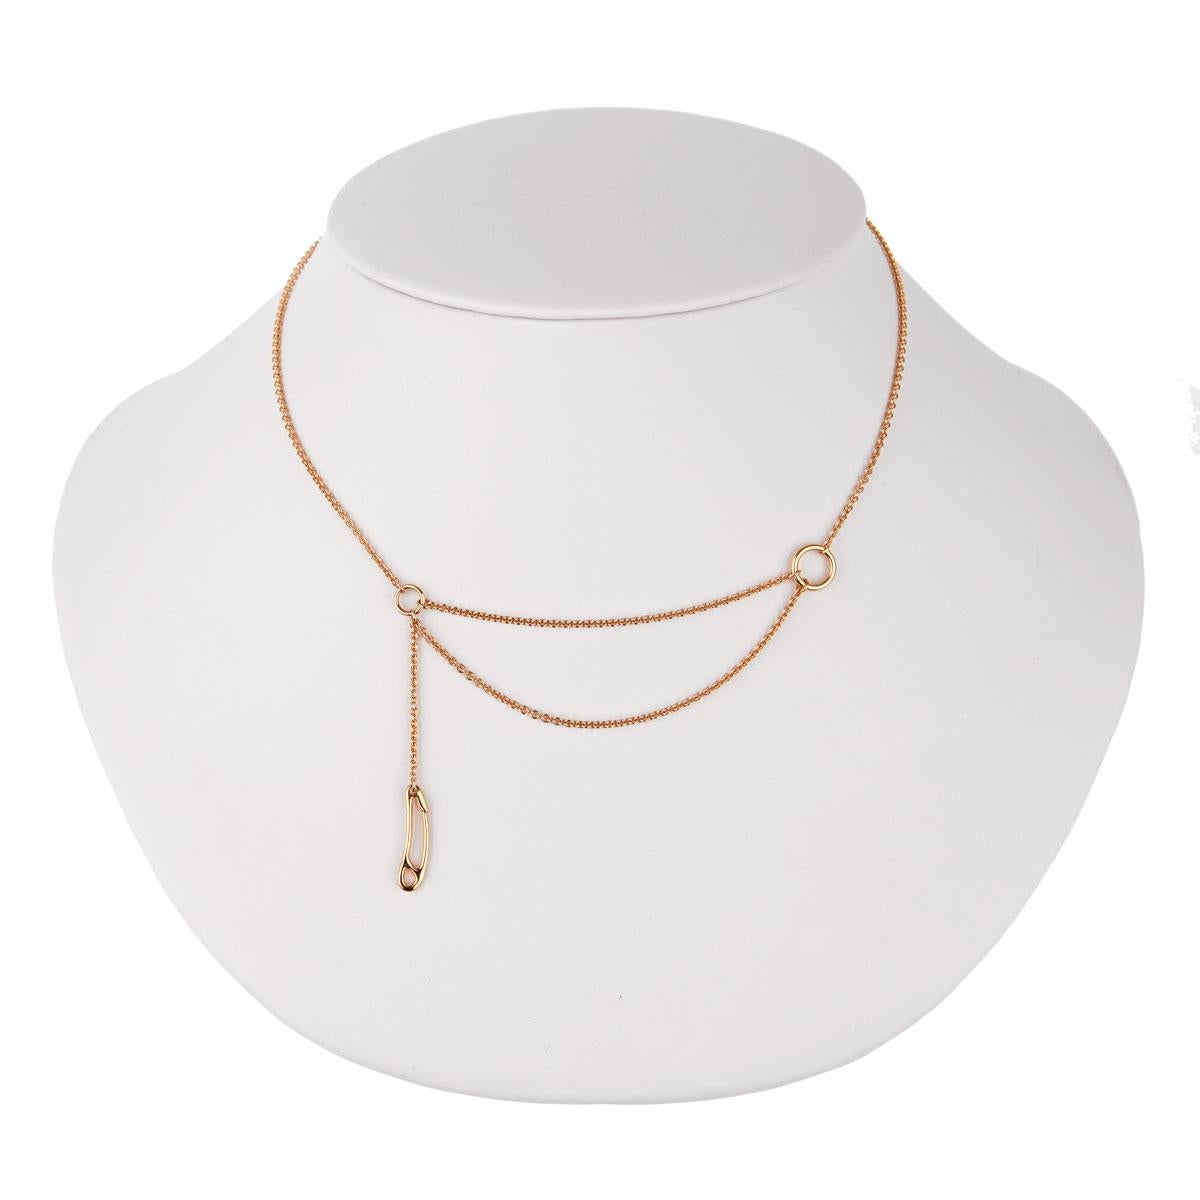 A chic Hermes Punk Gold  necklace crafted in 18k rose, the necklace measures 16.5